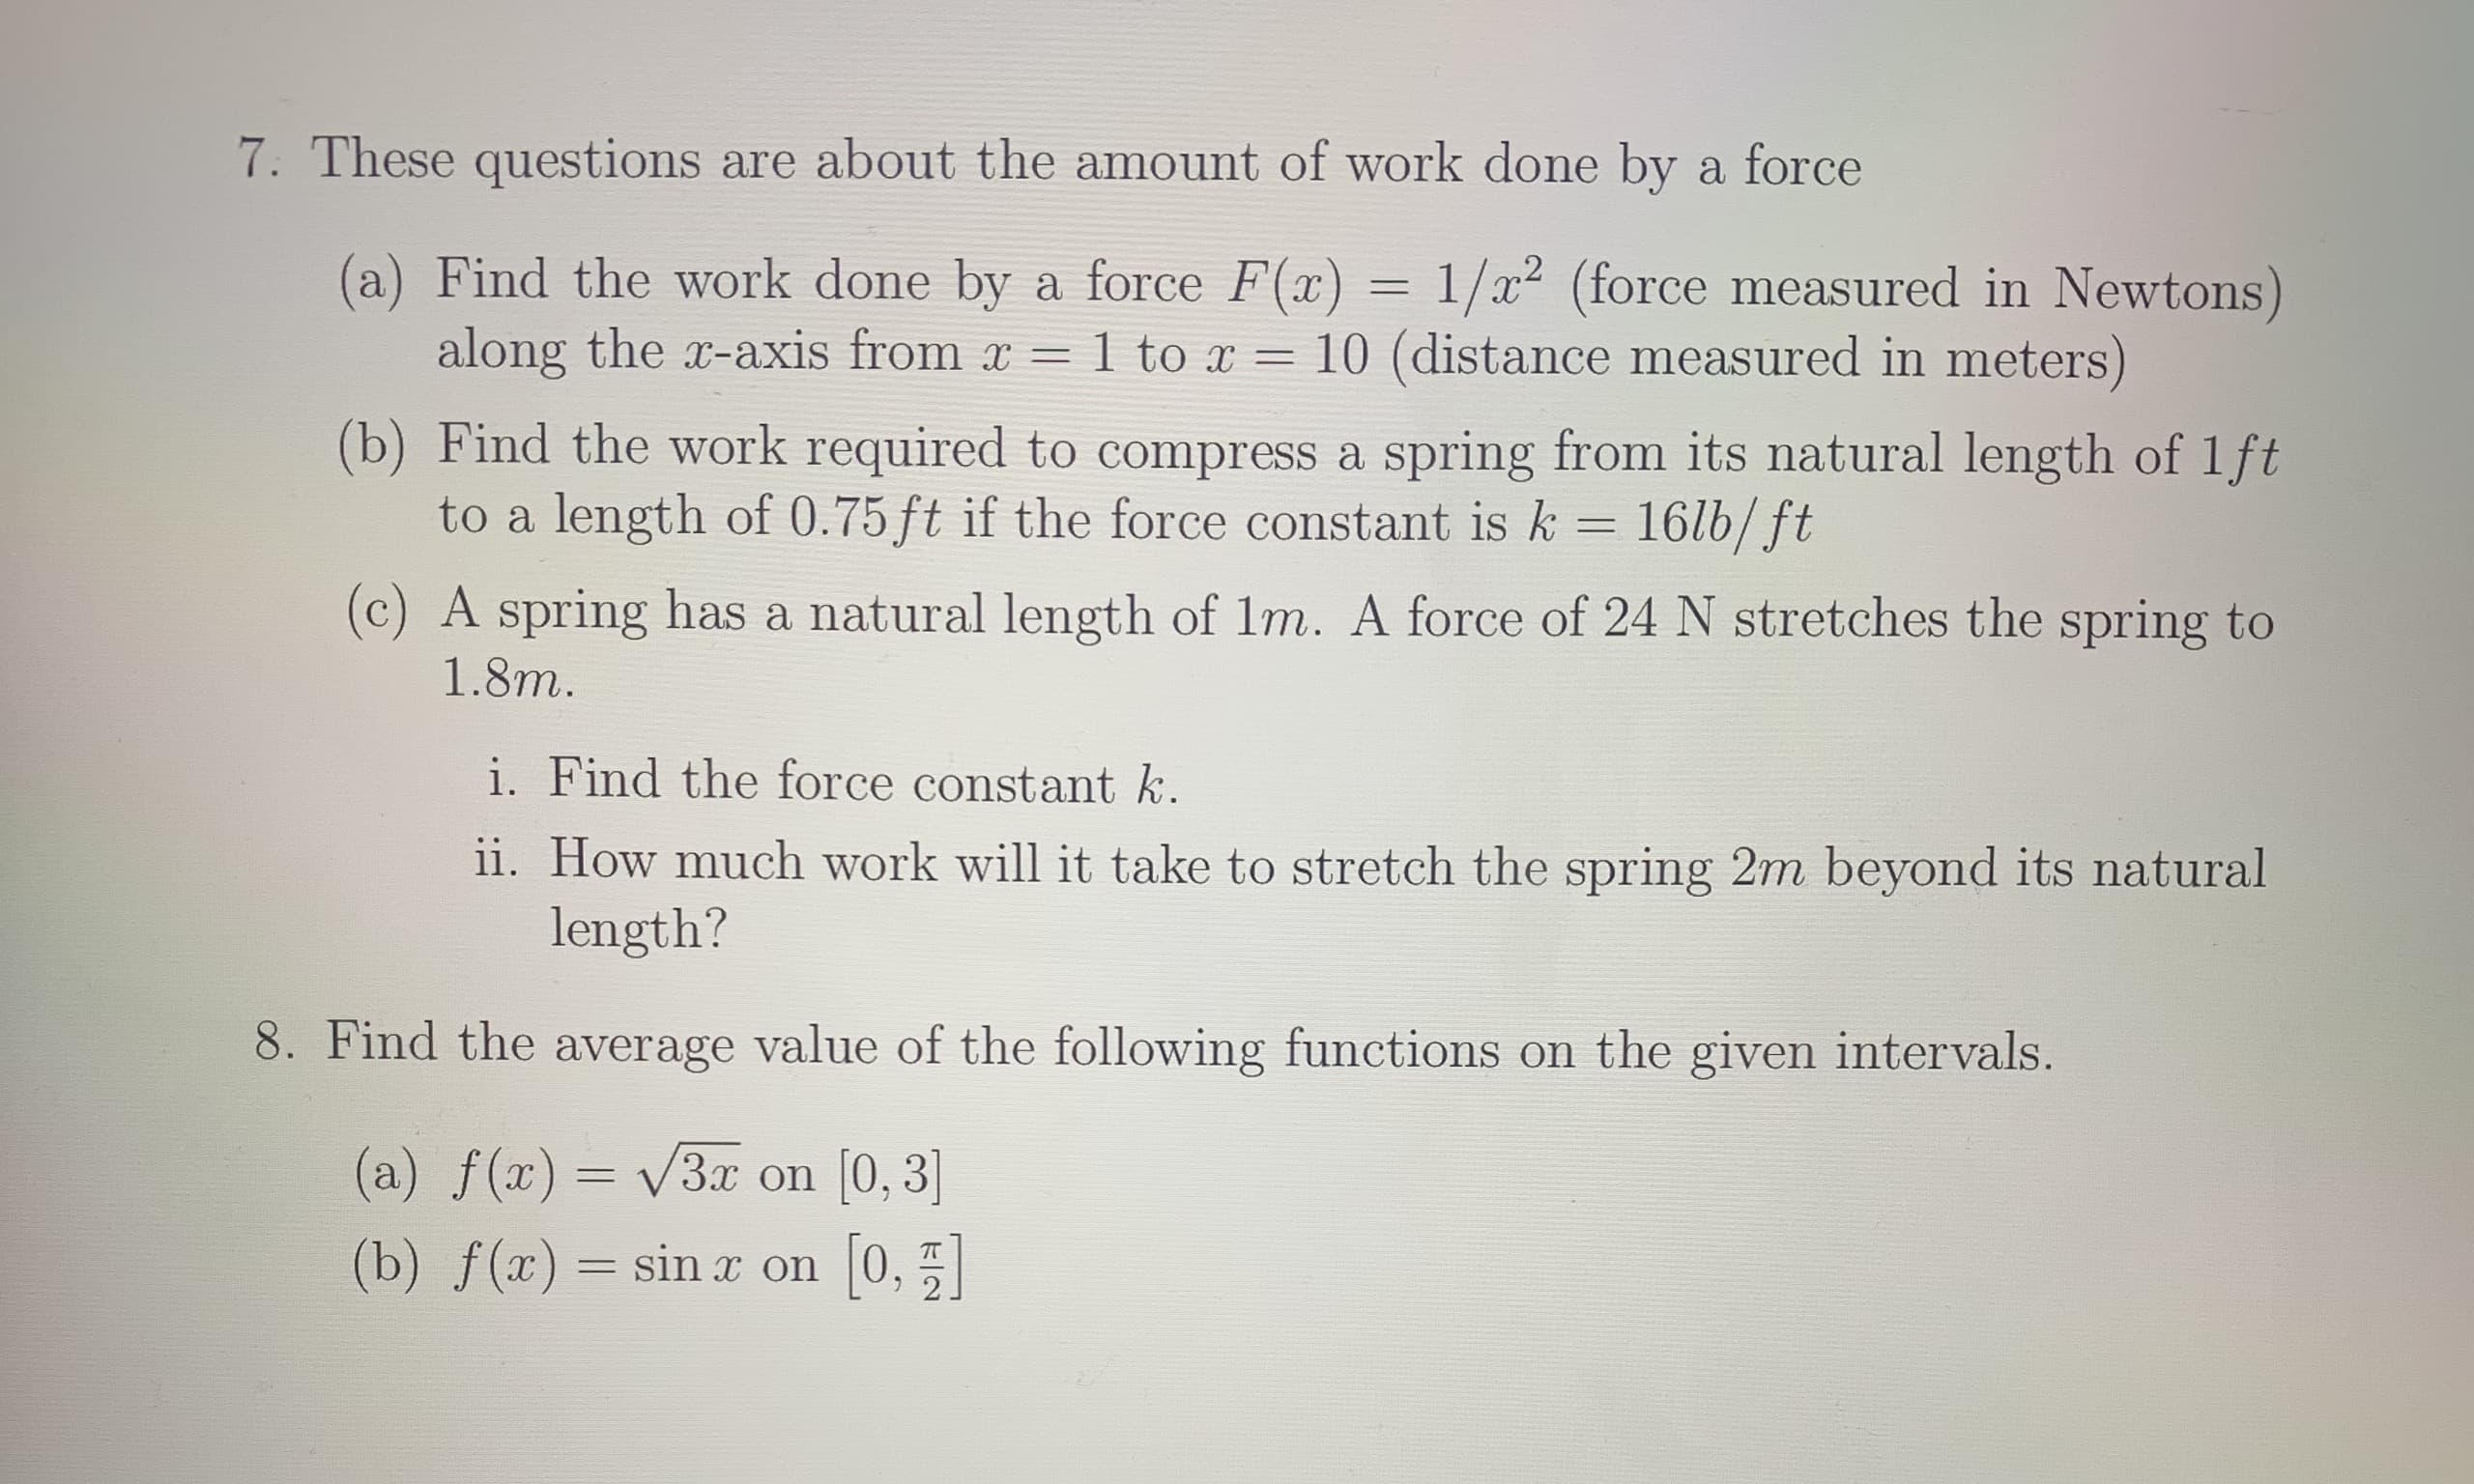 7. These questions are about the amount of work done by
a force
(a) Find the work done by a force F(x)
=
1/x2 (force measured in Newtons)
along the x-axis from r
10 (distance measured in meters)
1 to x
(b) Find the work required to compress a spring from its natural length of 1ft
to a length of 0.75ft if the force constant is k
16lb/ft
(c) A spring has a natural length of 1m. A force of 24 N stretches the spring to
1.8m.
i. Find the force constant k.
ii. How much work will it take to stretch the spring 2m beyond its natural
length?
8. Find the average value of the following functions on the given intervals.
(a) f (x) 3x
0,
(0, 3]
(b) f(x) sin x on
